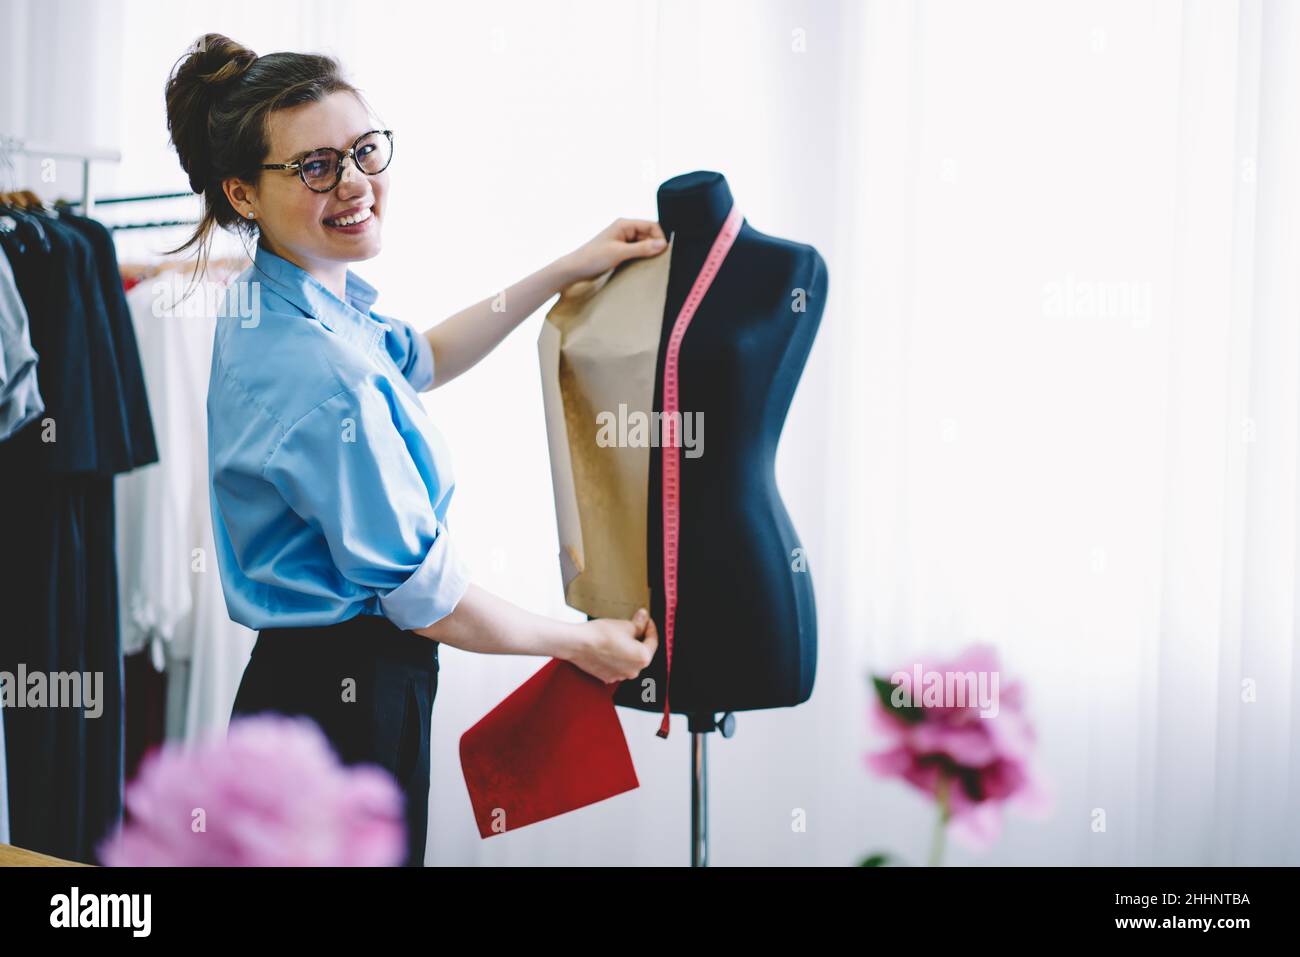 Positive female professional taking measurements on mannequin Stock Photo